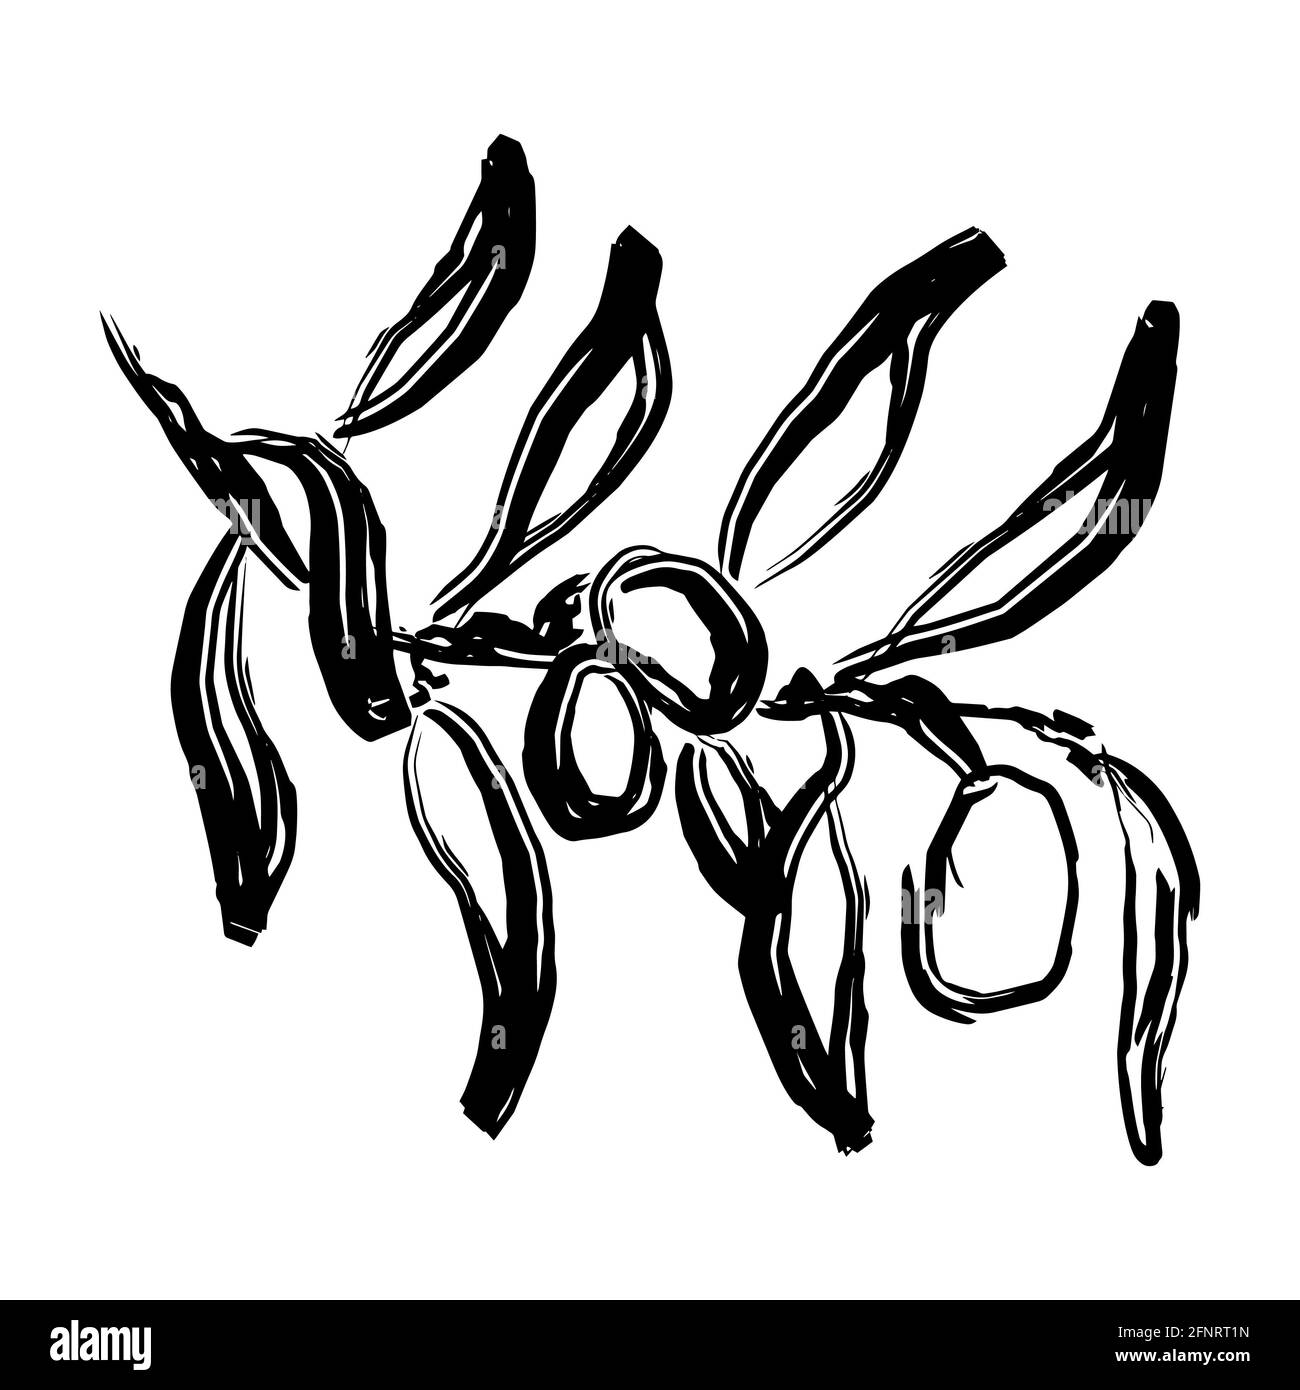 bunch of olives branch with leaves and olives olives vector doodle brush black outline Stock Photo